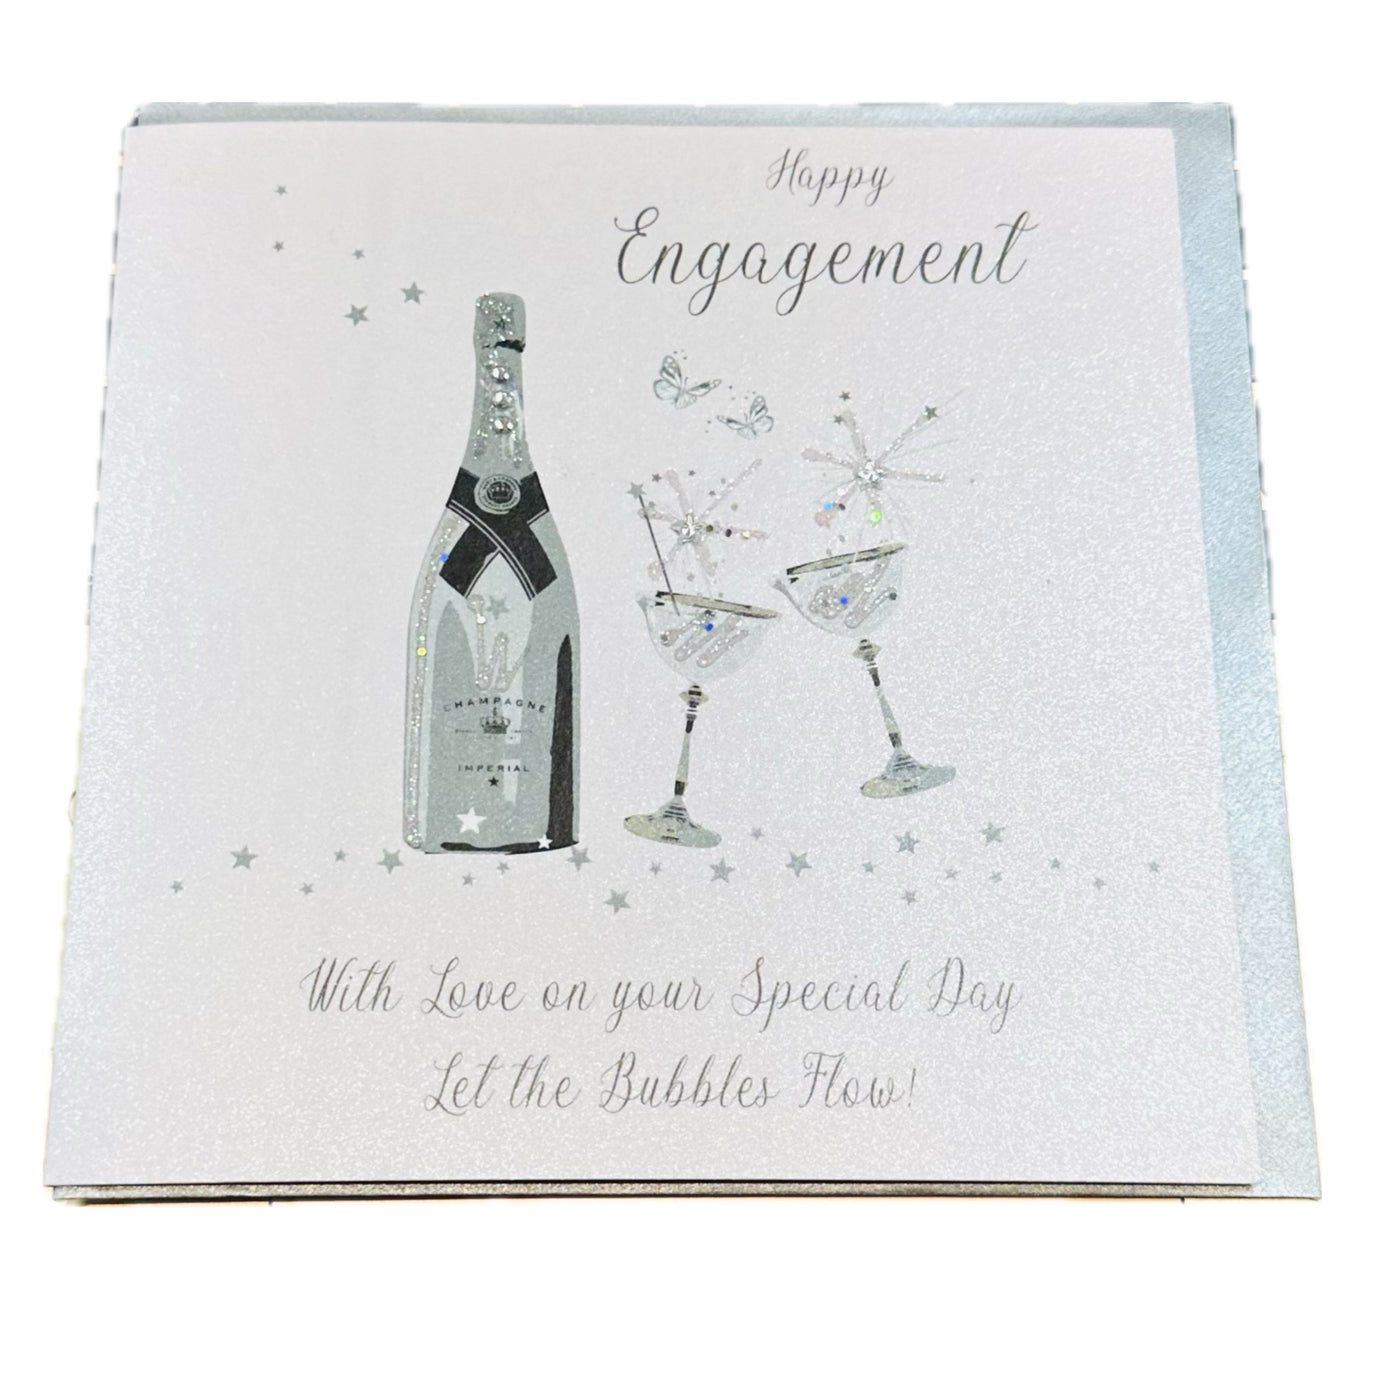 Happy Engagement Pink Champagne & Sparkling Glasses Card - White Cotton Cards